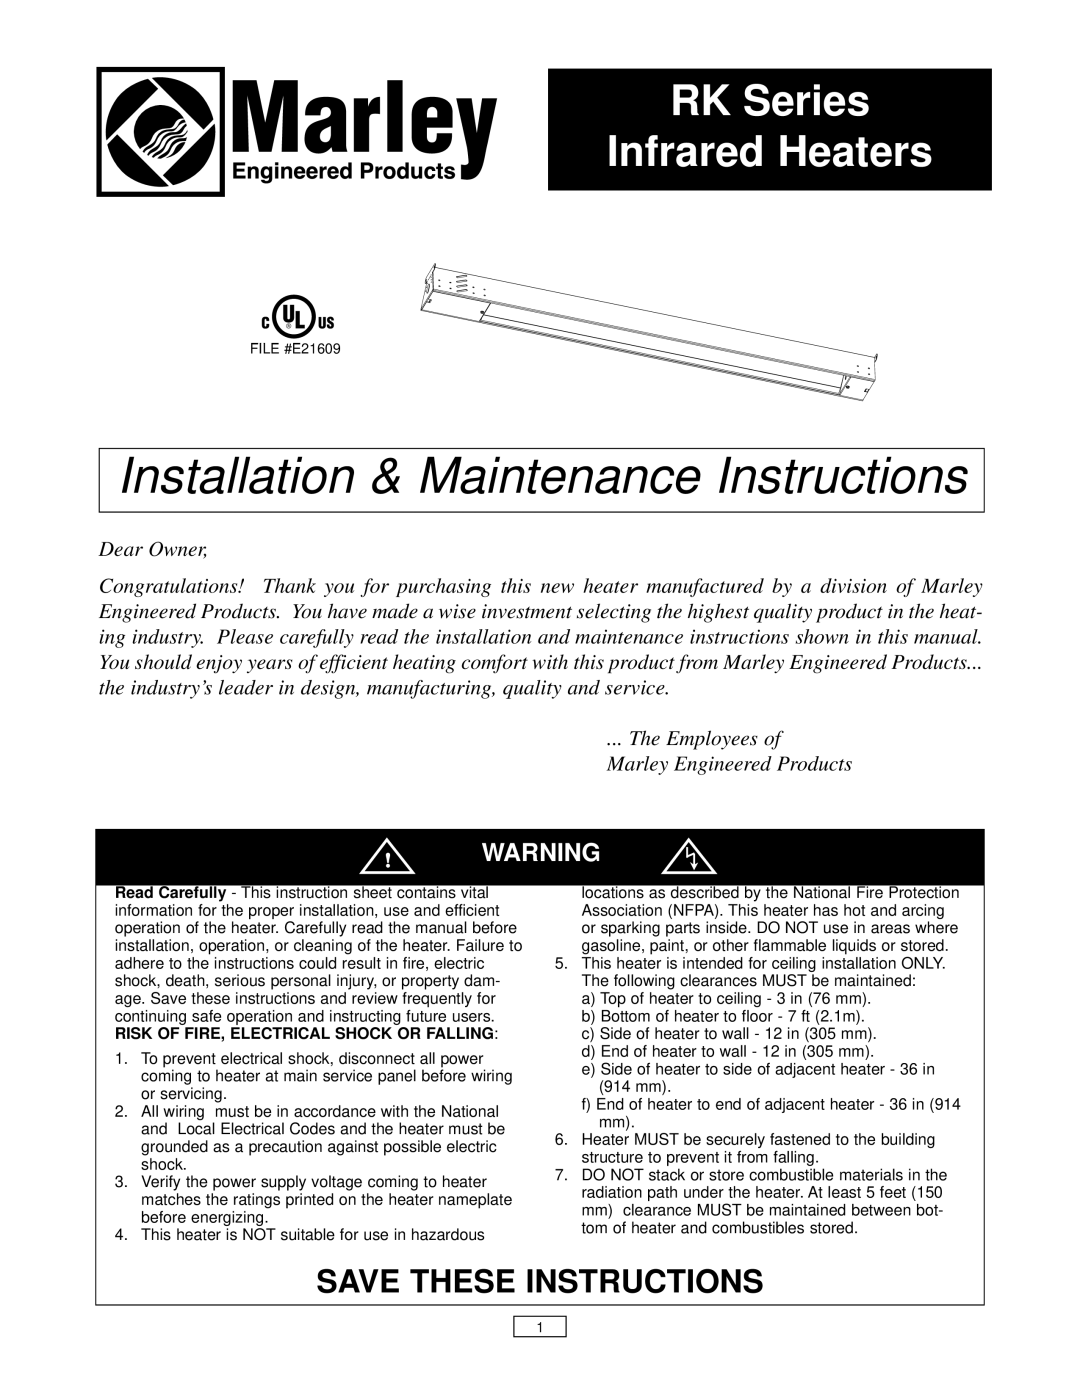 Marley Engineered Products RK Series instruction sheet Risk Of Fire, Electrical Shock Or Falling, Save These Instructions 